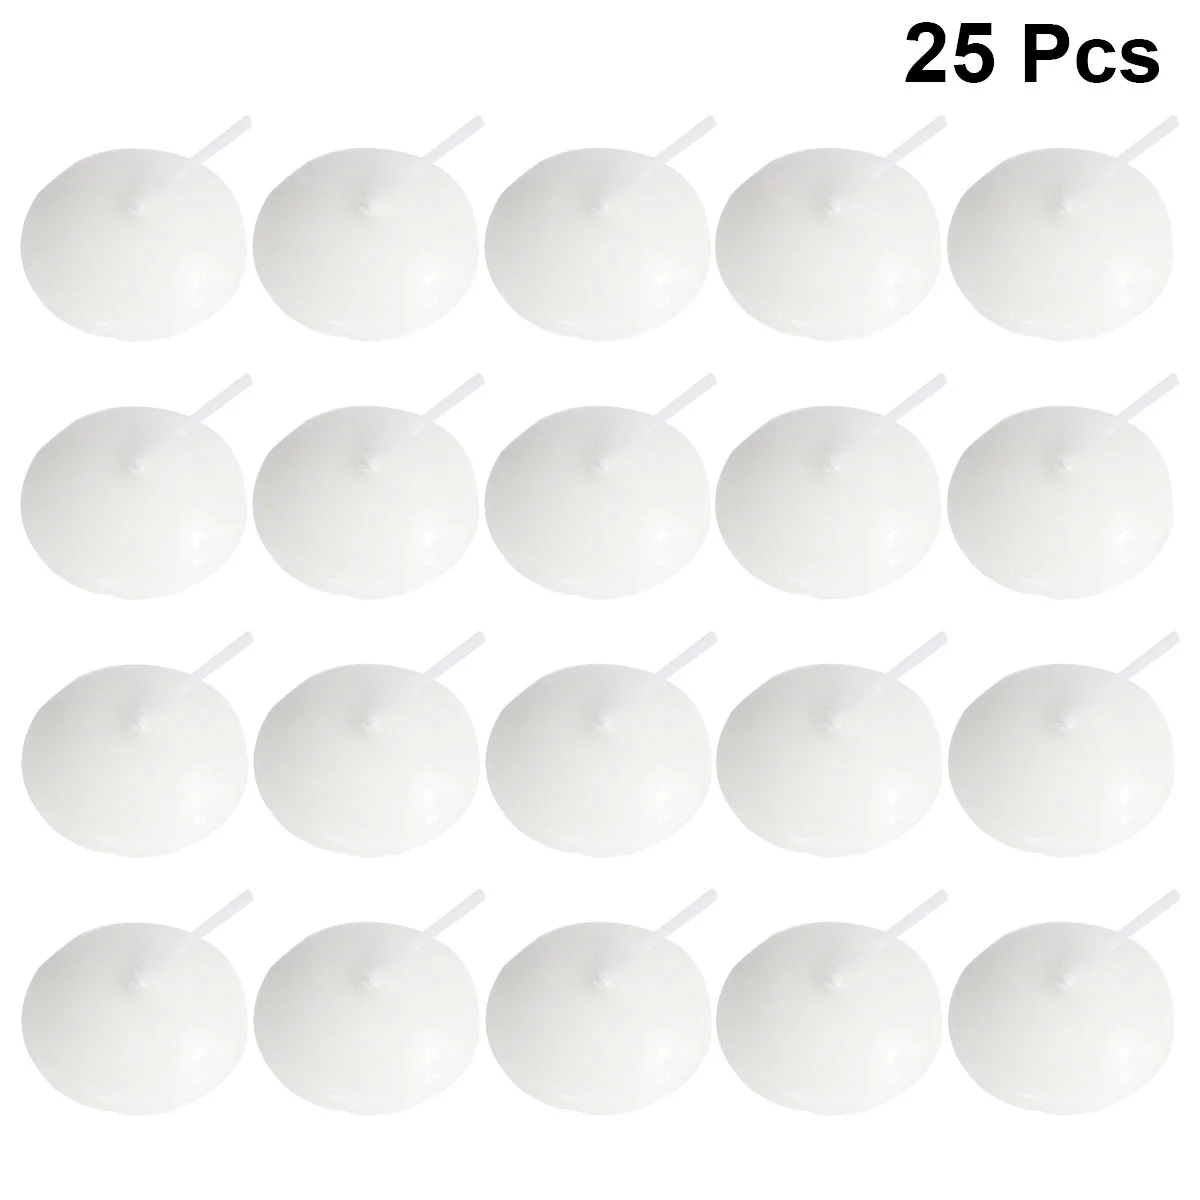 

25PCS LED Tealight Floating Candles for Pool Floating Candles Event Floating Candles Floating Tealight Candles